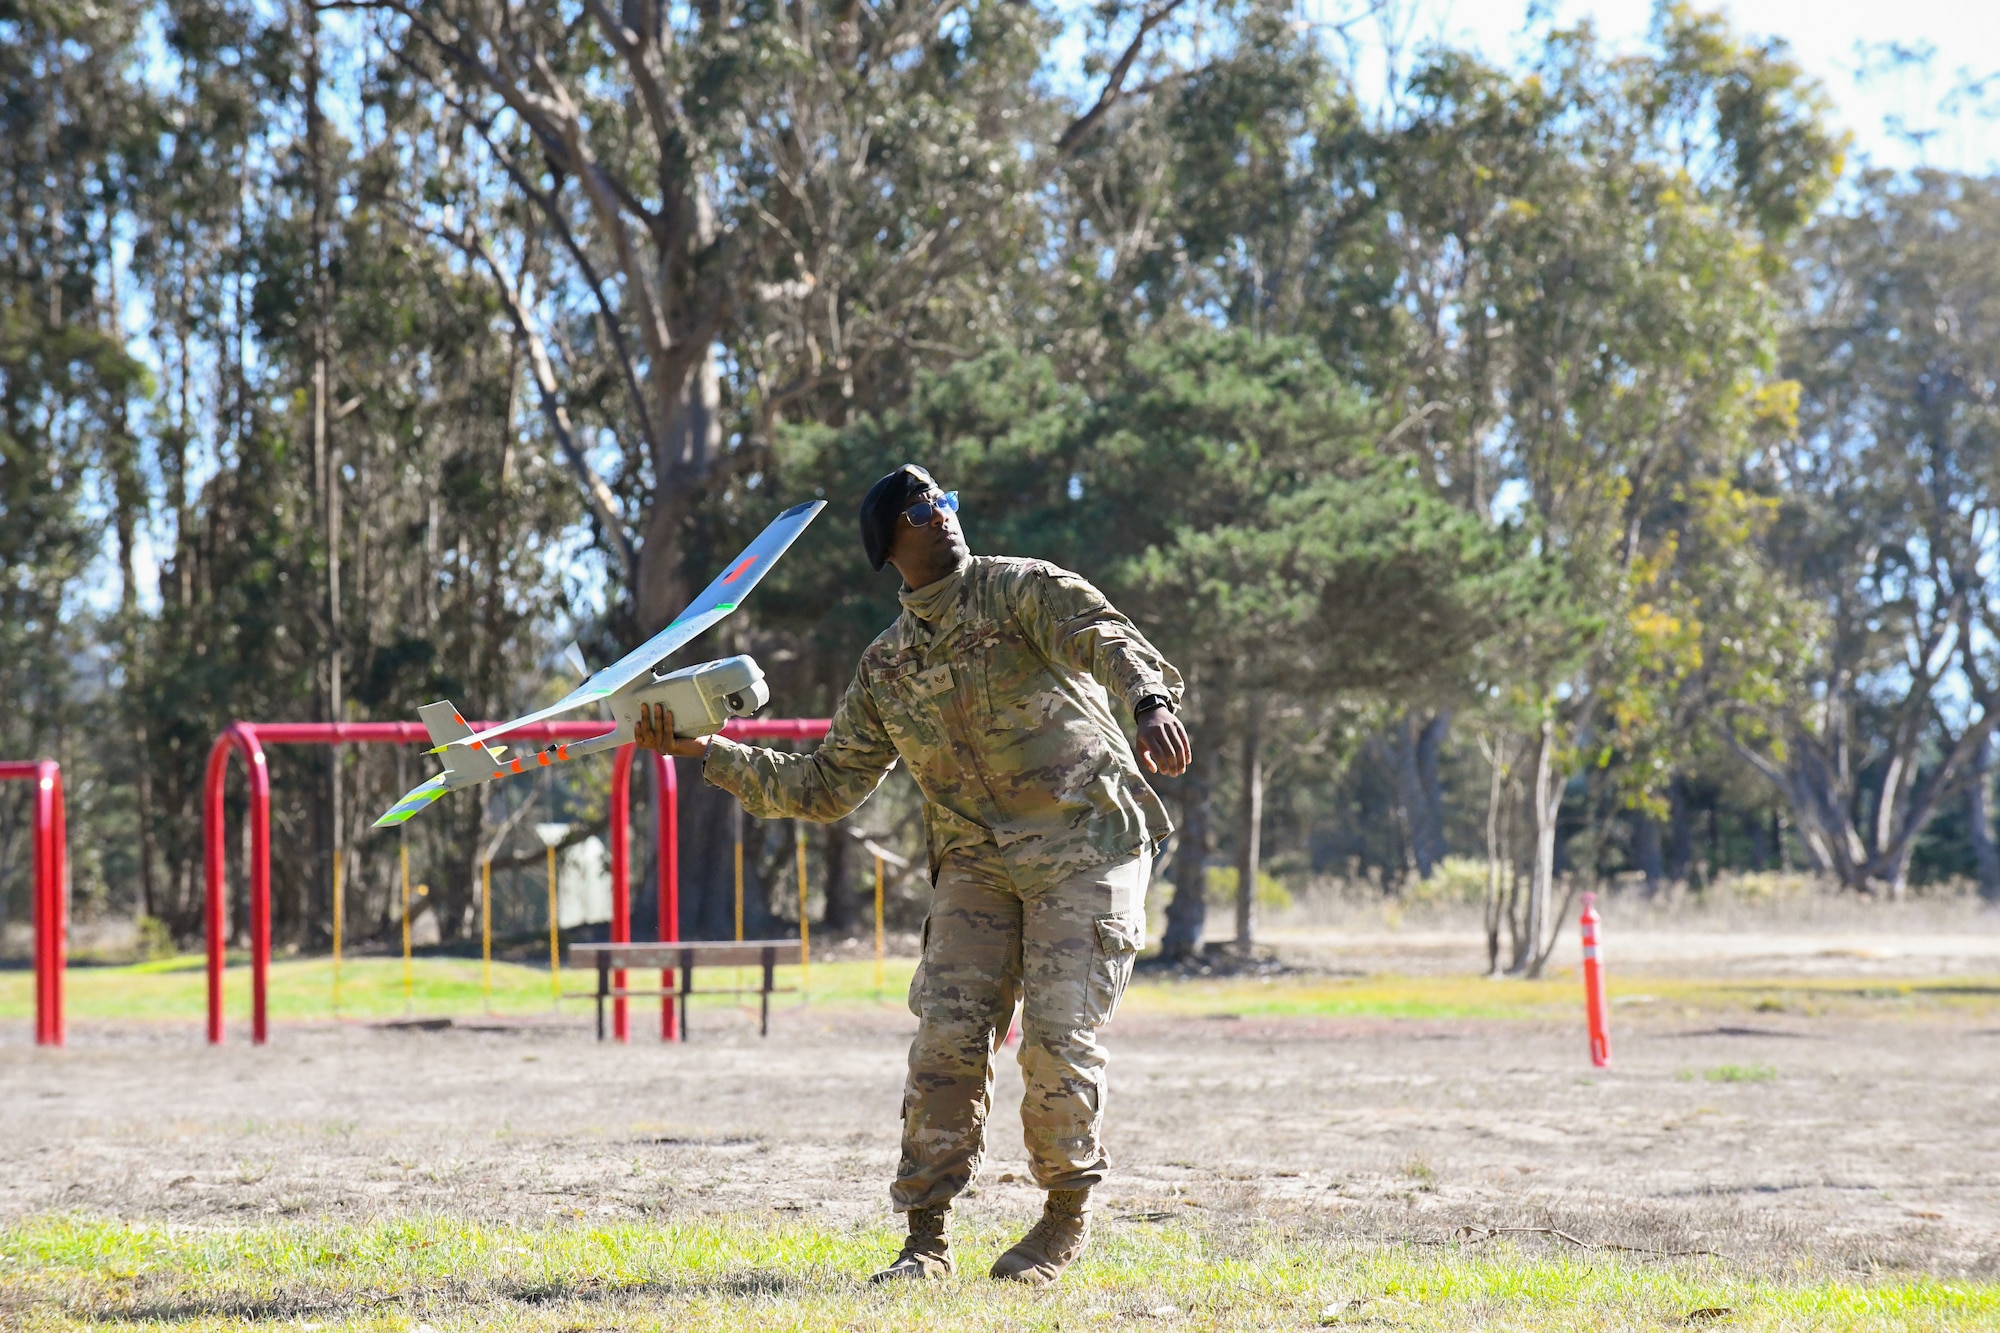 Staff Sgt. Paul Chaplin, 30th Security Forces Squadron drone operator, demonstrated the power of drone and aerial footage at the West Coast Warriors First Responders Appreciation Week on Oct. 15, 2021 at Vandenberg Space Force Base, Calif. (U.S. Space Force photo by Airman 1st Class Rocio Romo)